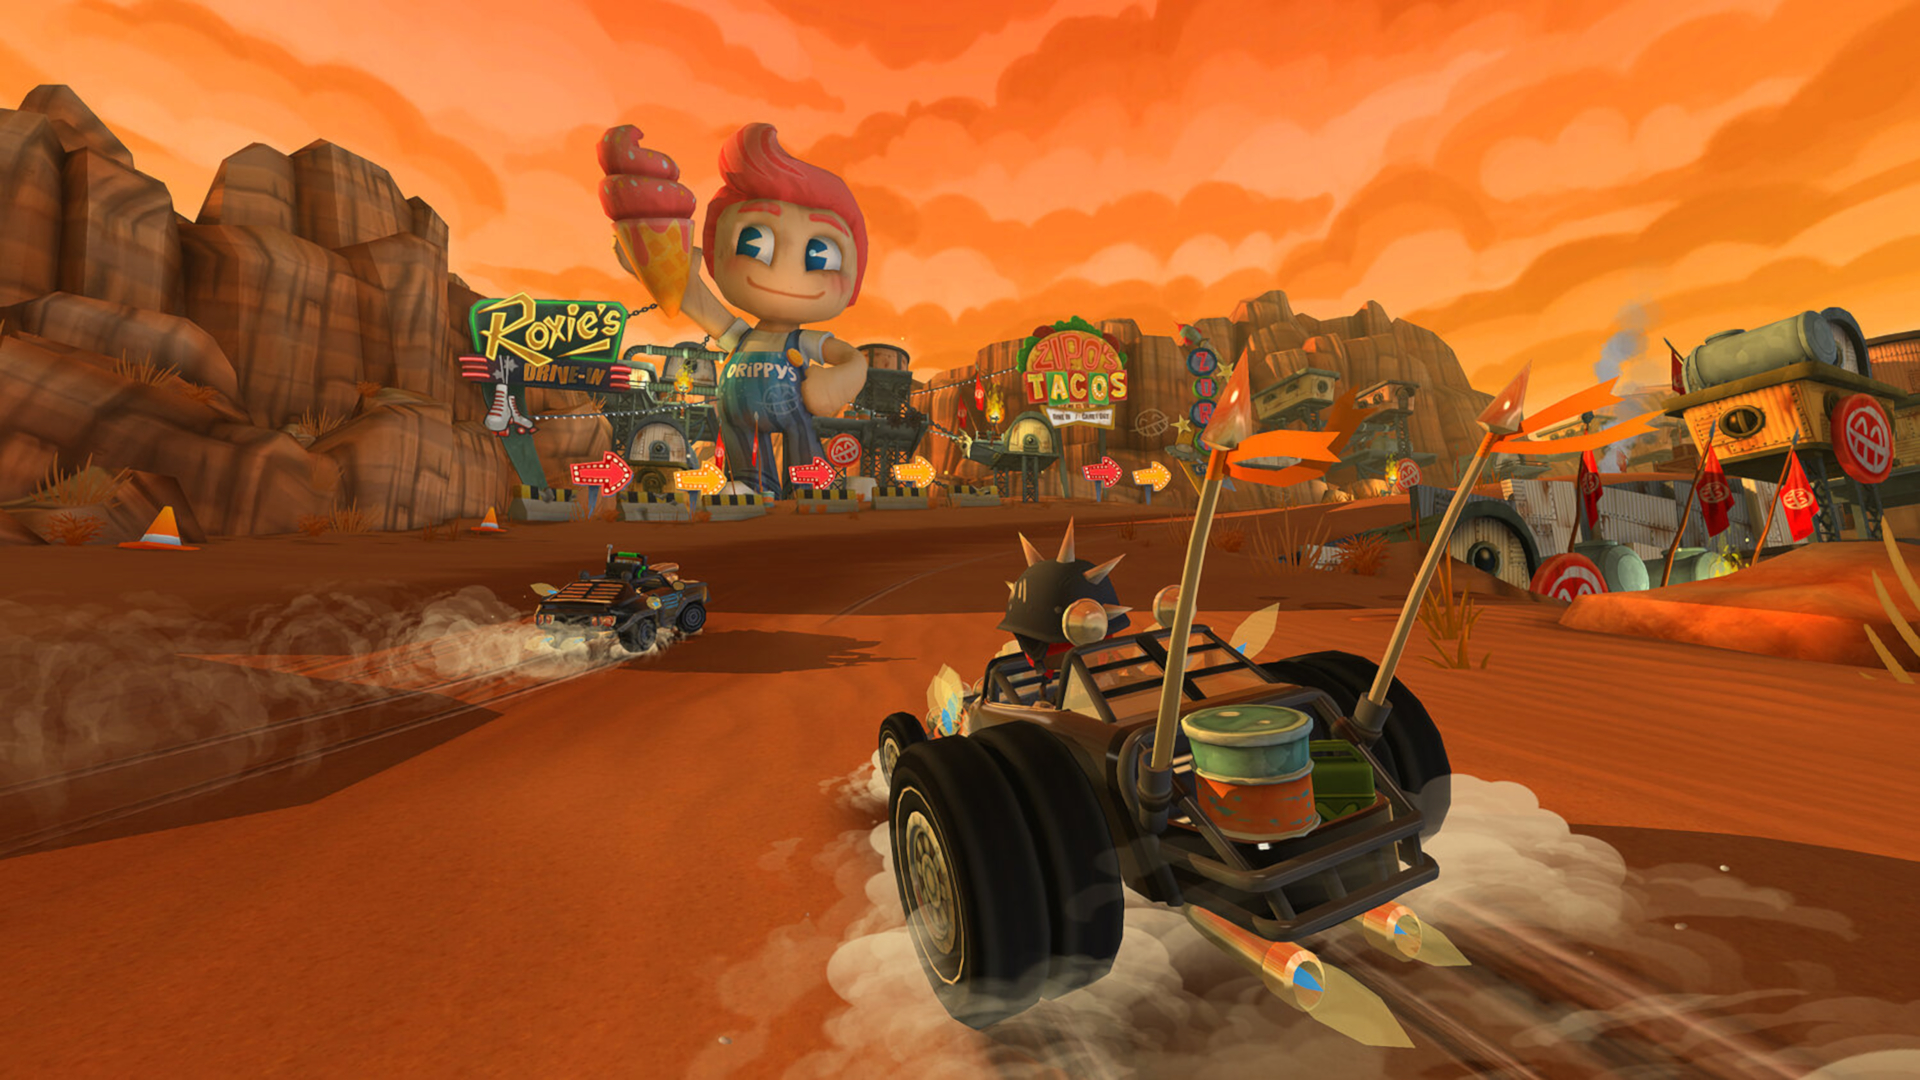 beach buggy racing download for pc free